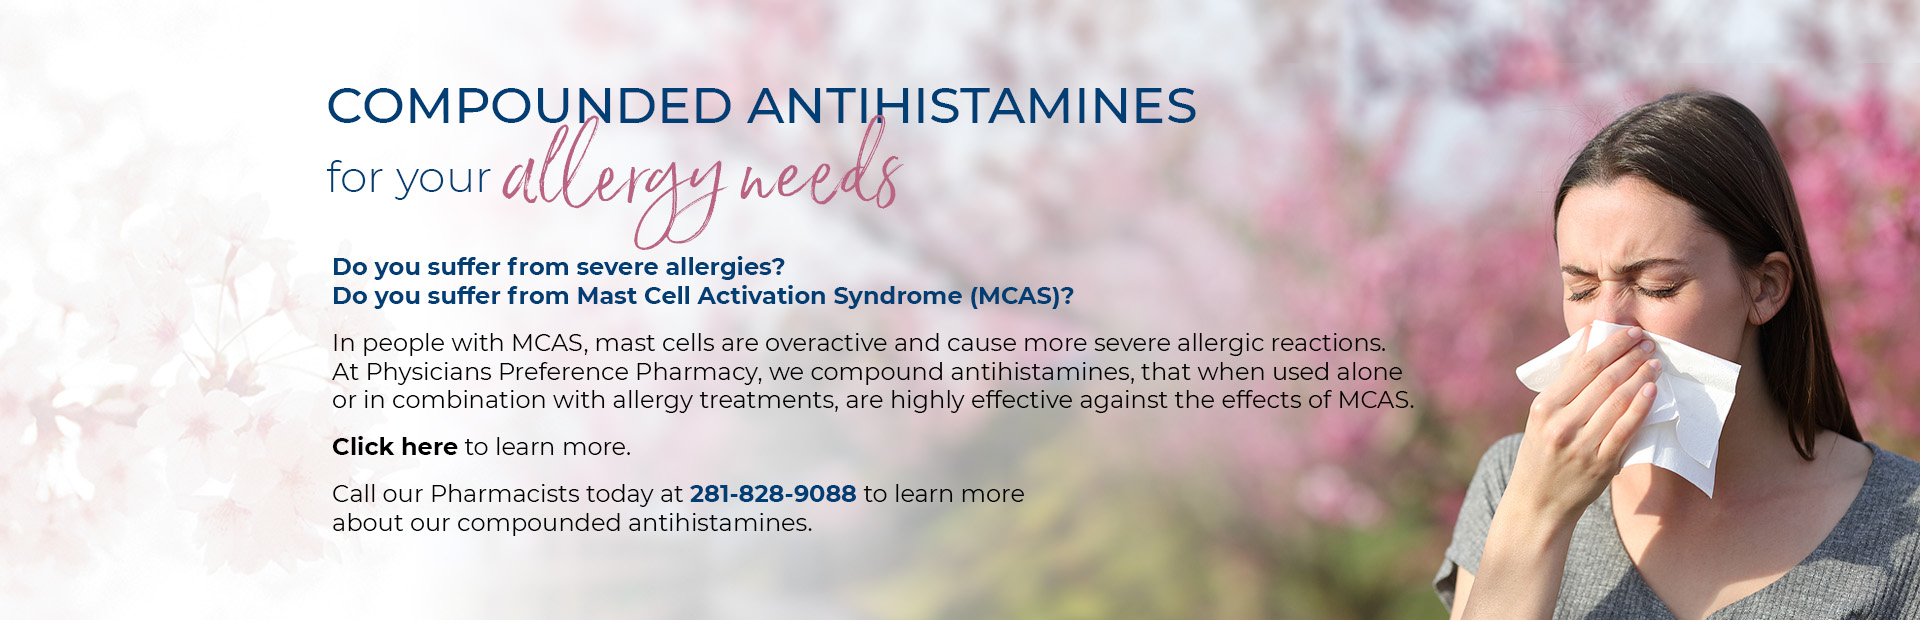 Compounded Antihistamines for Mast Cell Activation Syndrome (MCAS)